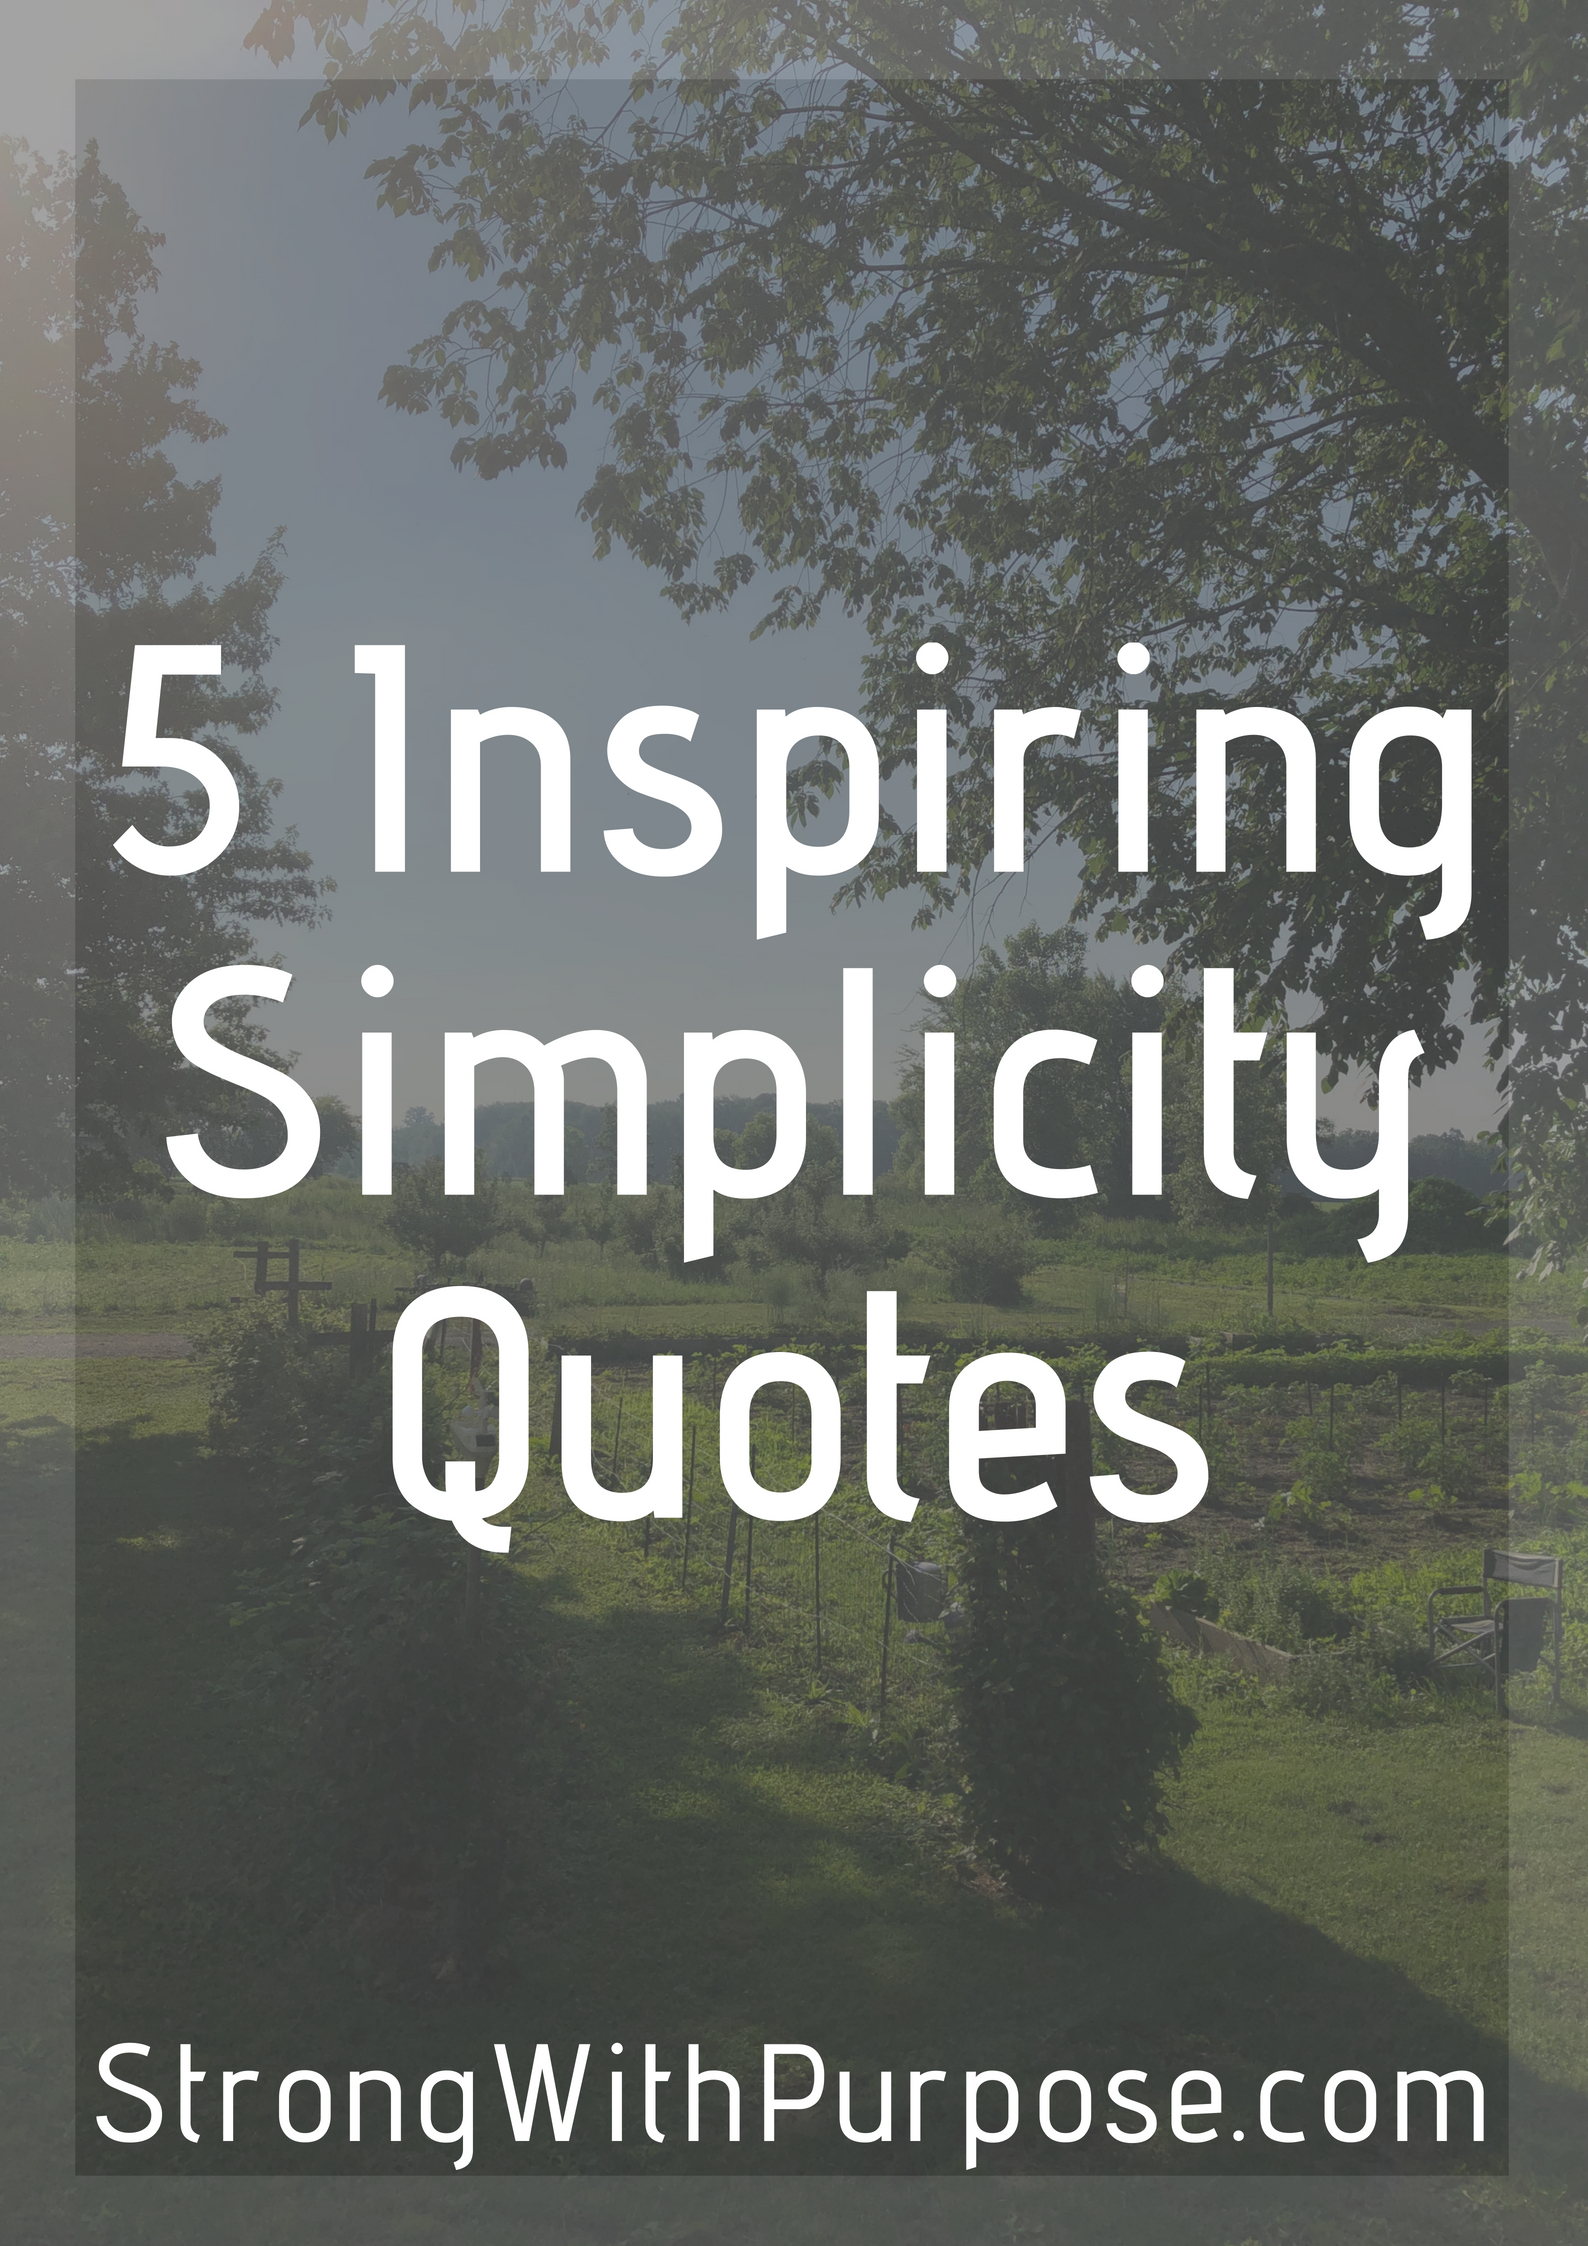 5 Inspiring Simplicity Quotes - Strong with Purpose